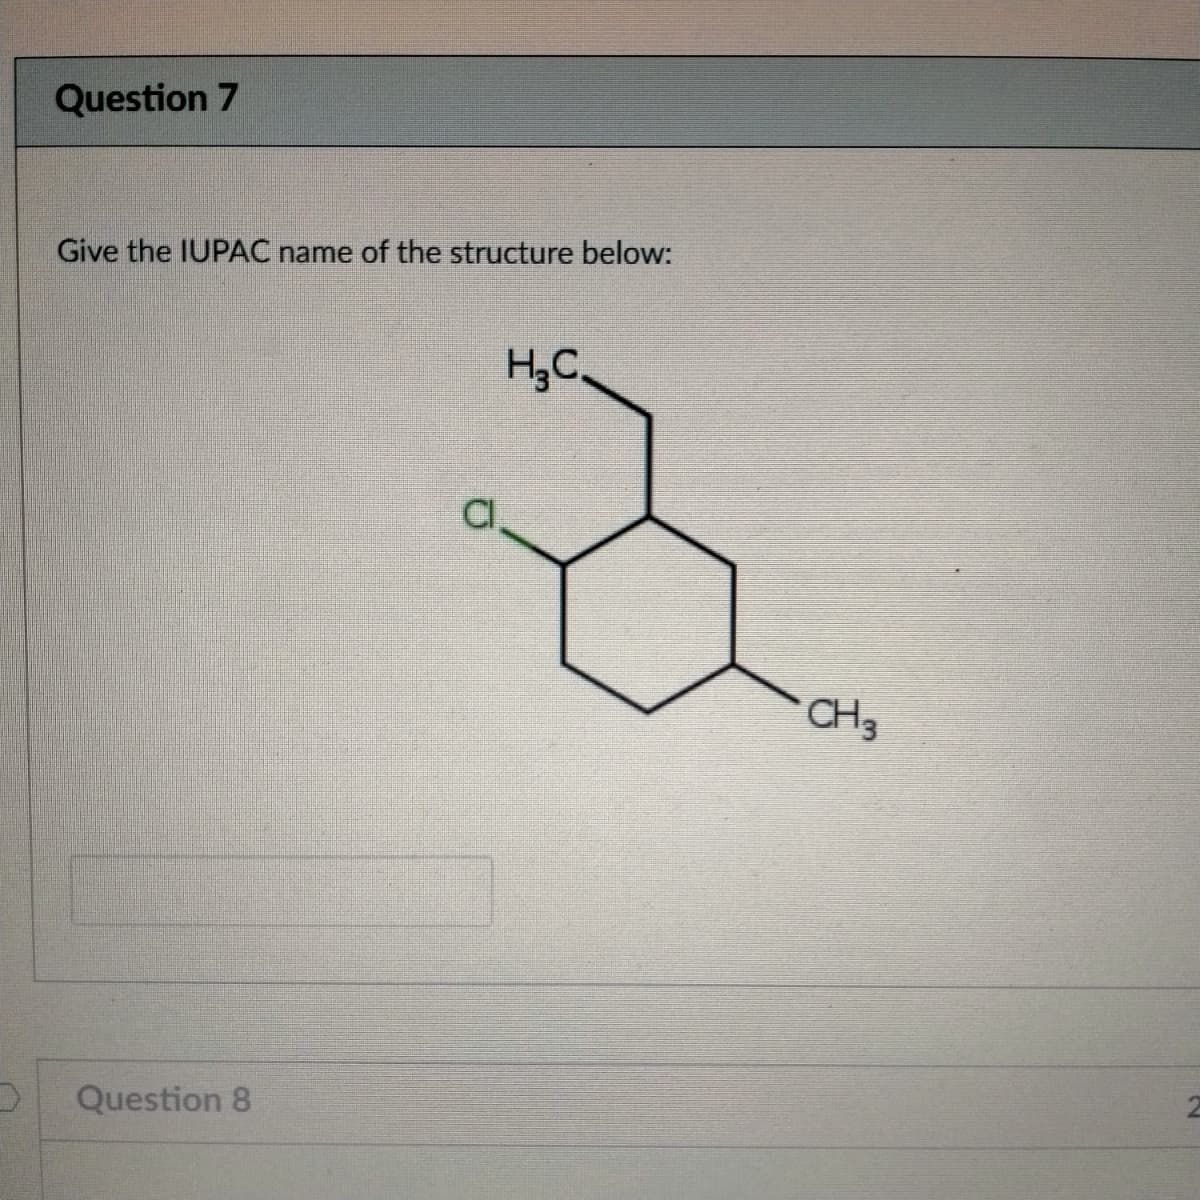 Question 7
Give the IUPAC name of the structure below:
H;C.
CH3
Question 8
